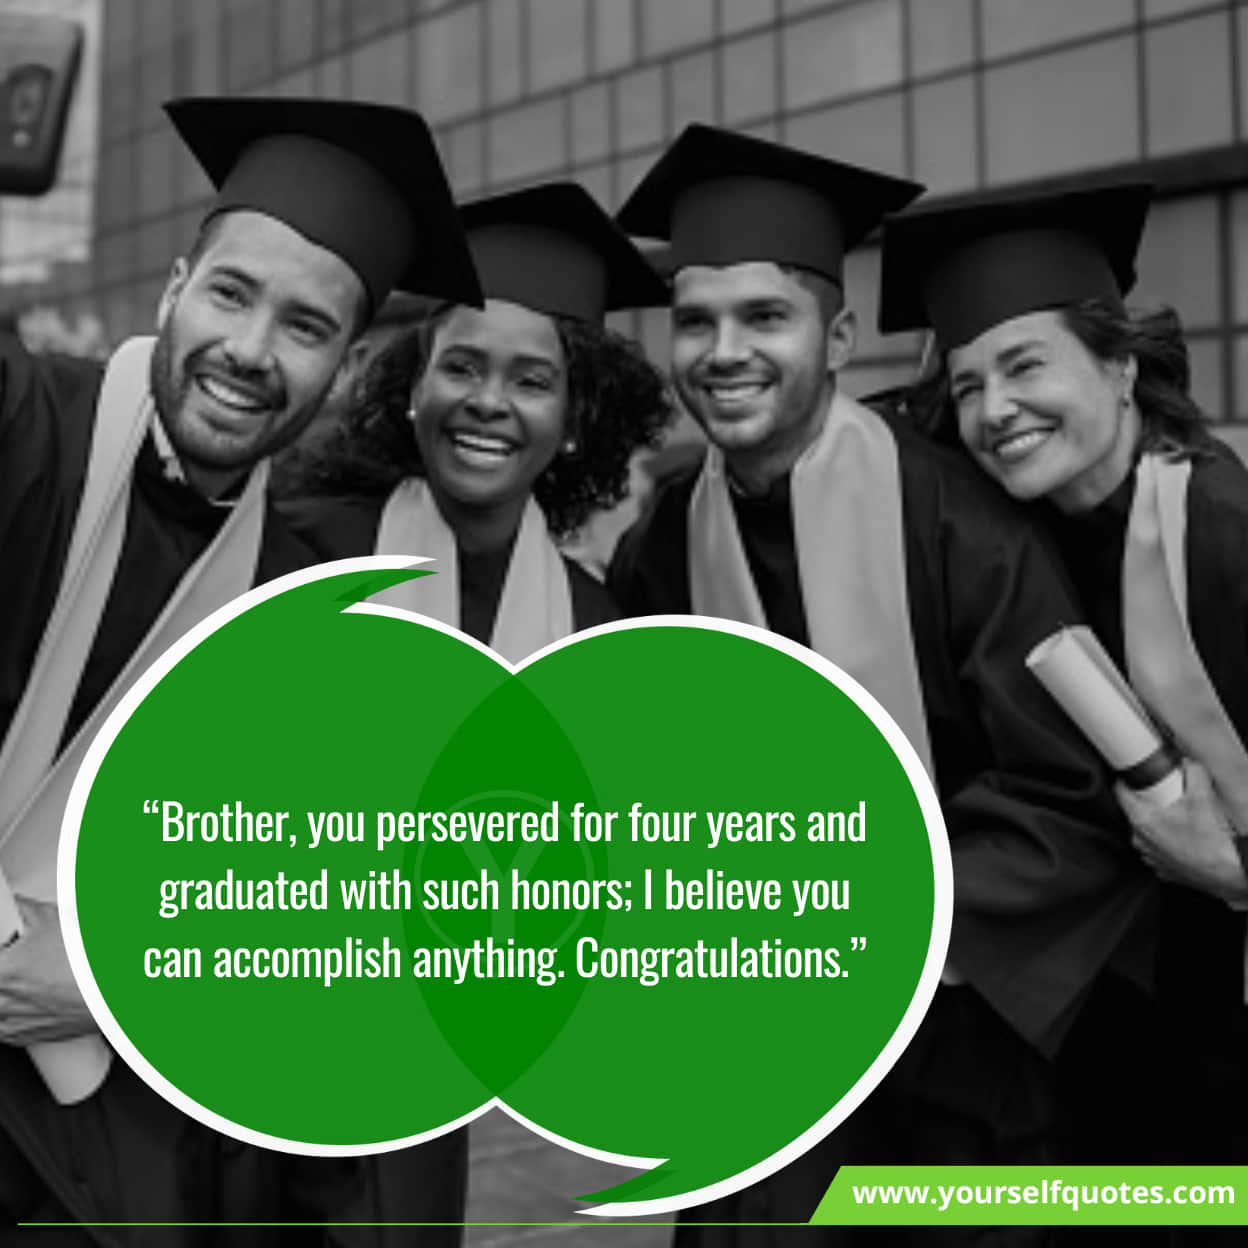 Graduation Wishes Quotes Messages For Brother